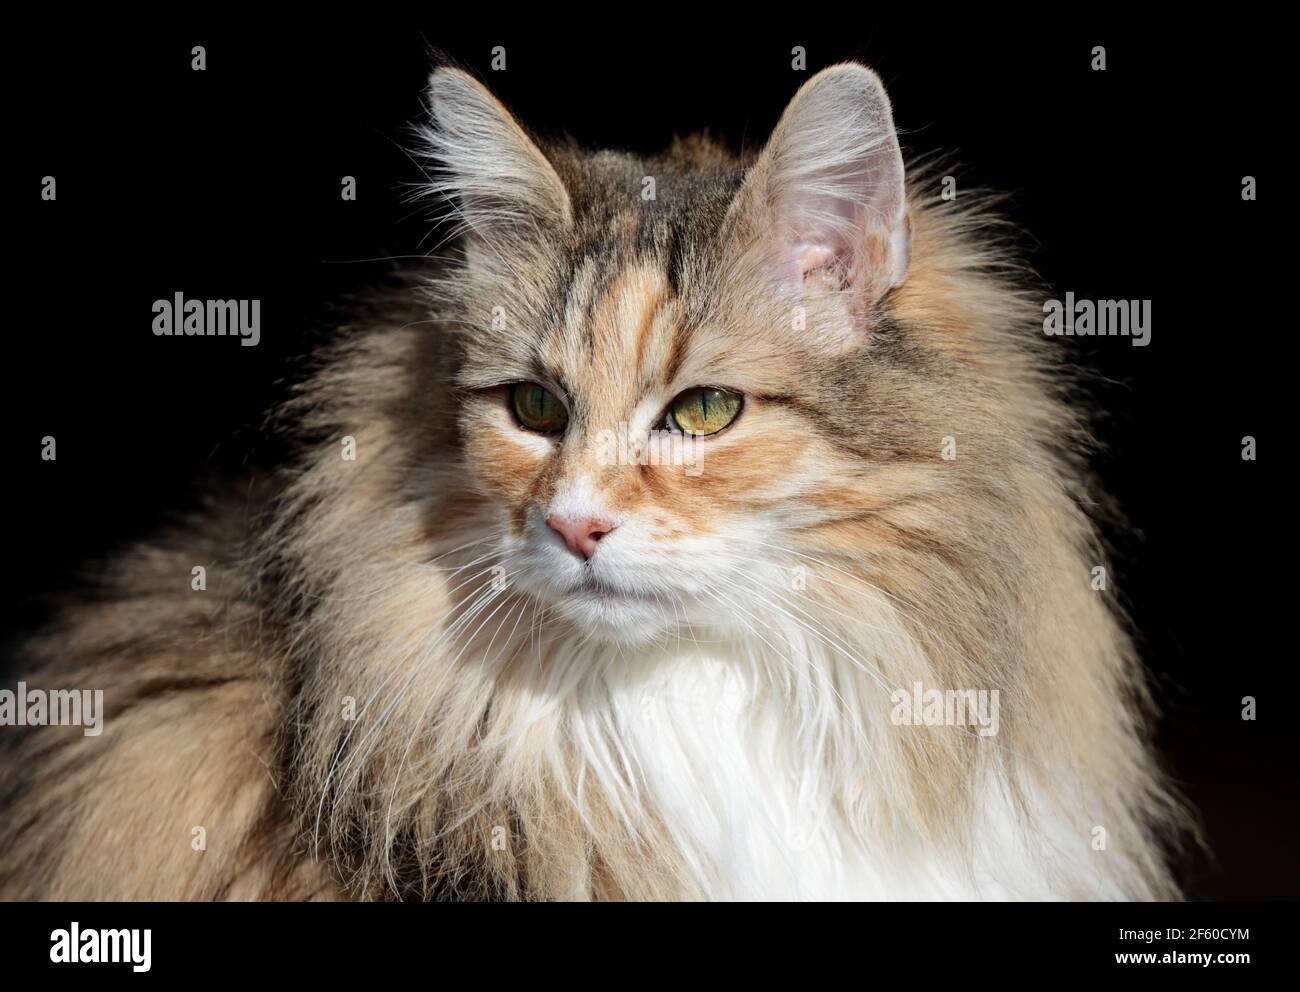 A portrait of a norwegian forest cat on a sunny day Stock Photo